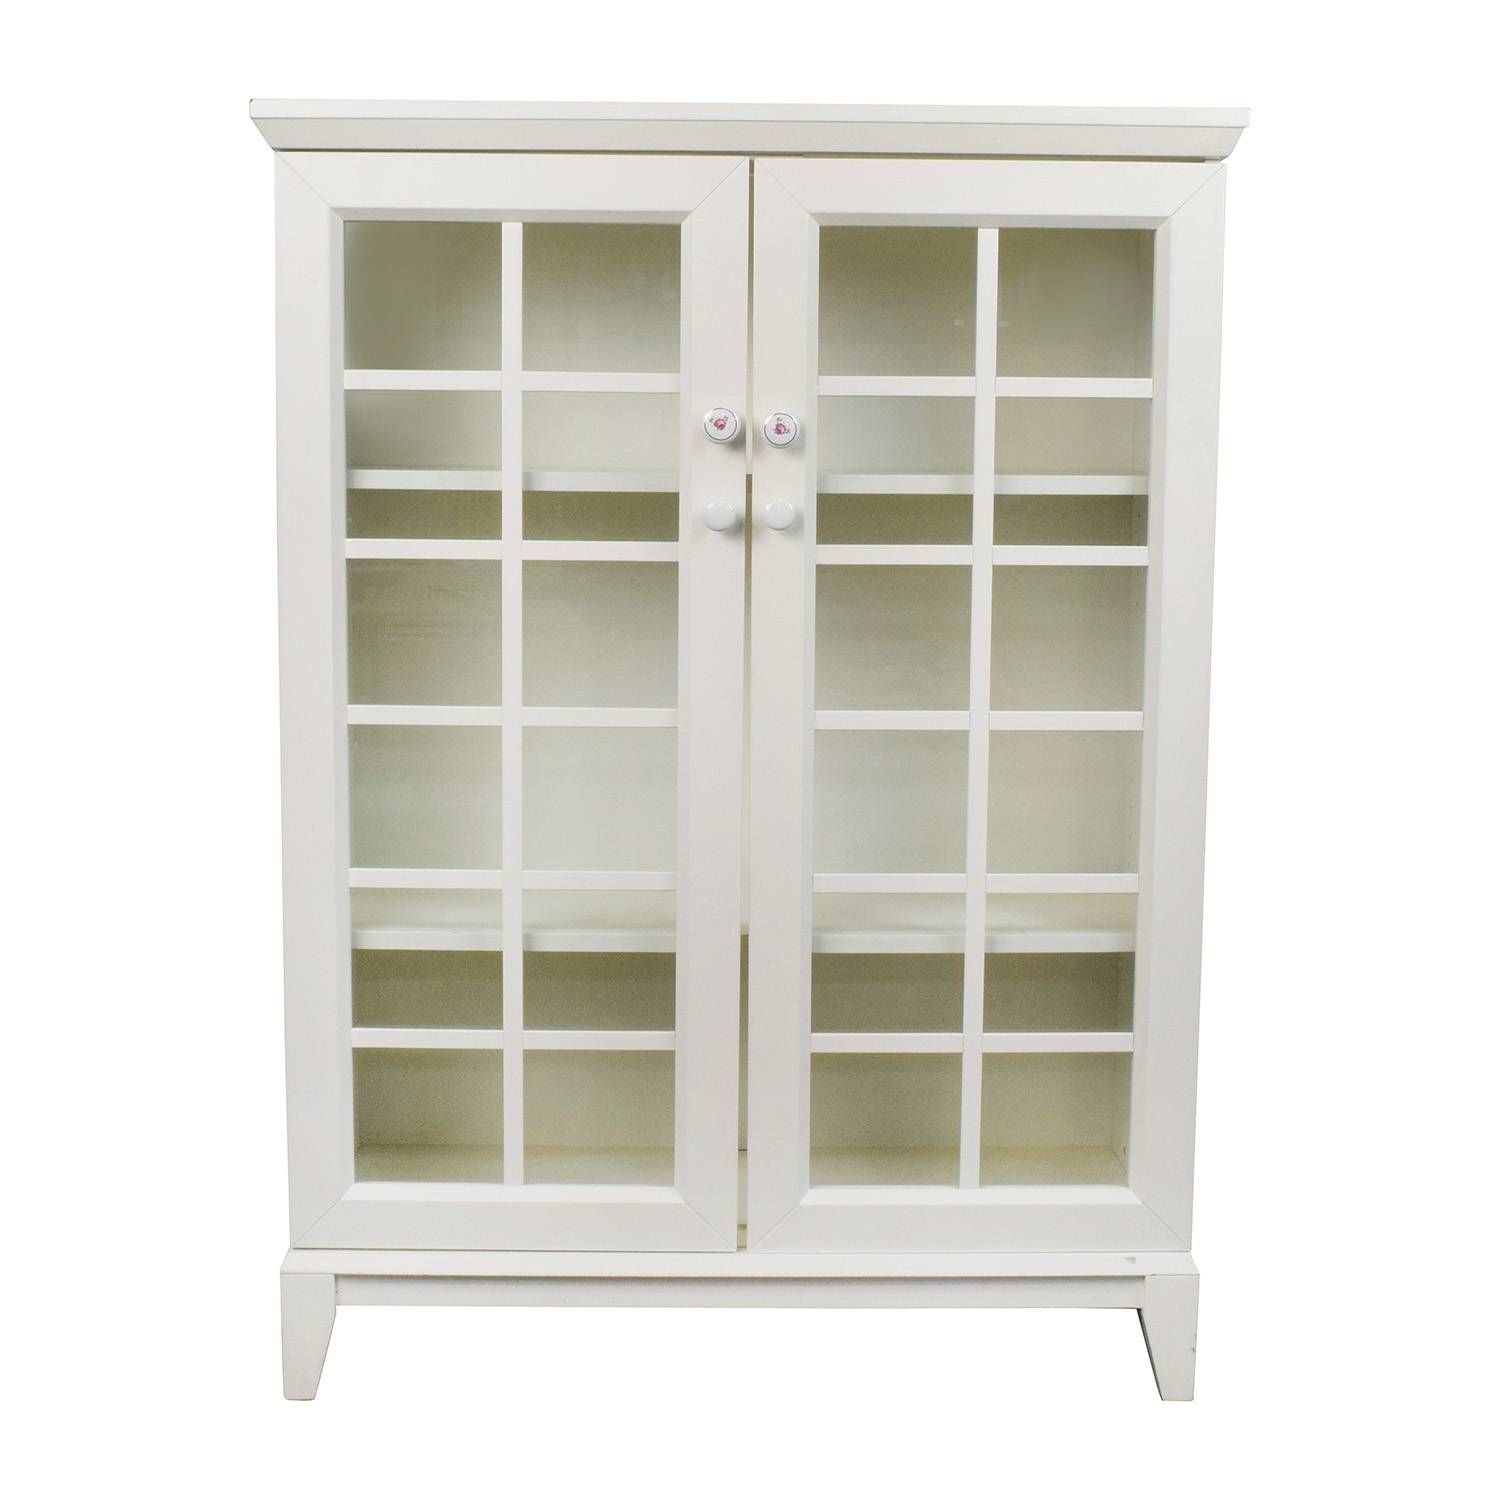 48% Off – Crate And Barrel Crate And Barrel White China Cabinet Throughout Recent Crate And Barrel Sideboards (View 8 of 15)